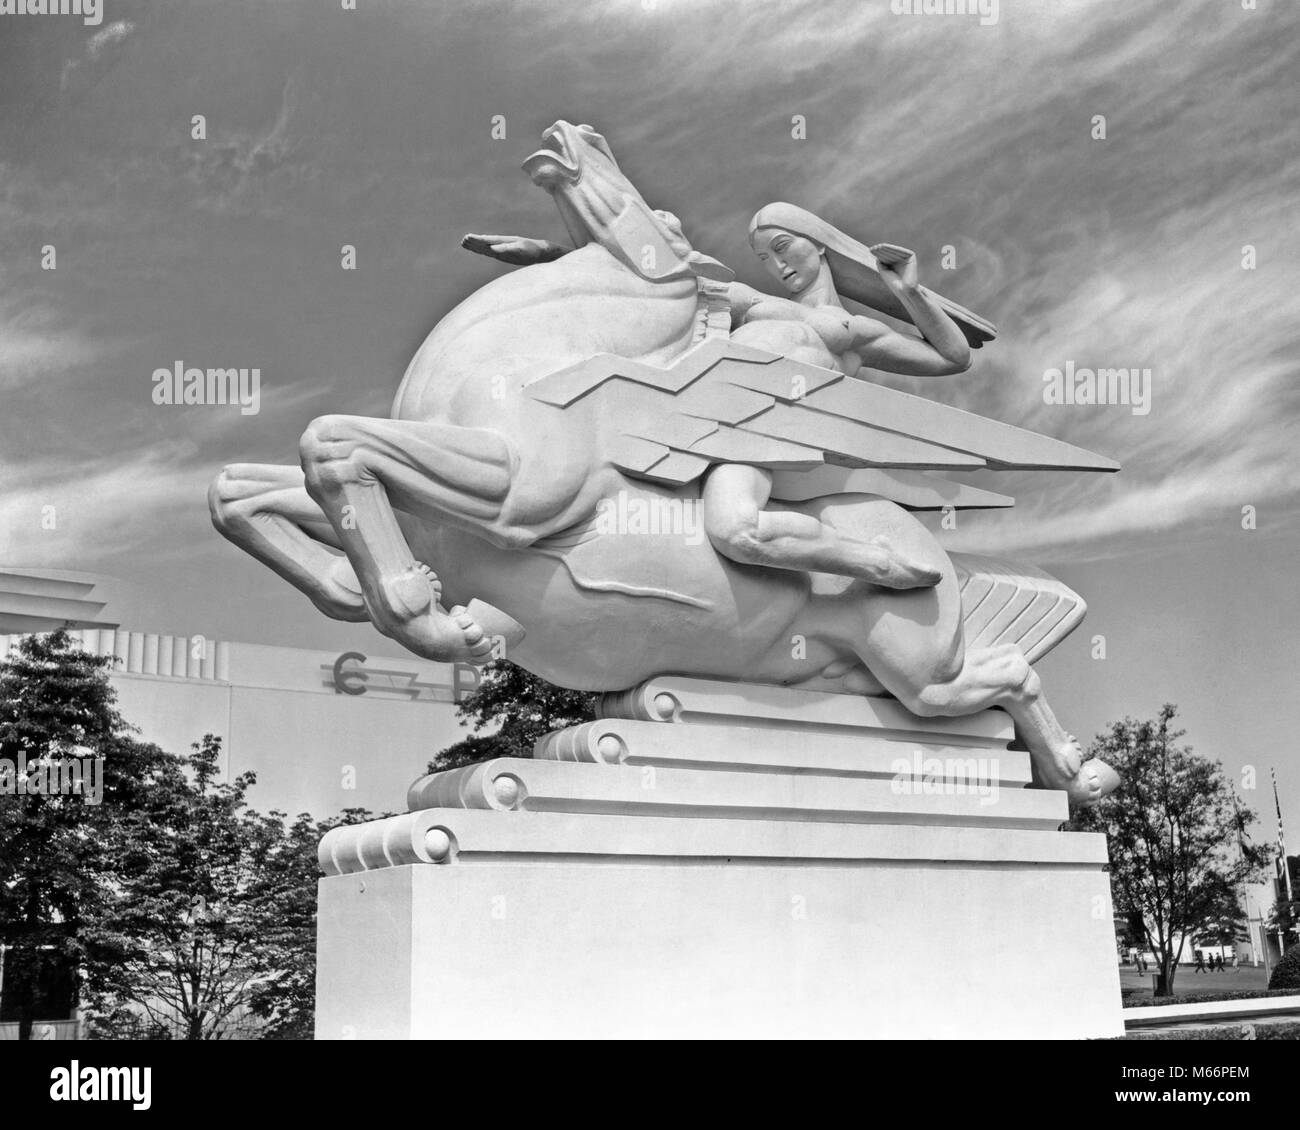 1930s 1939 WORLD'S FAIR MONUMENT TO SPEED IN THE COURT OF COMMUNICATIONS NEW YORK CITY NY USA - r1370 PAL001 HARS LOW ANGLE NOBODY GOTHAM NYC WORLD'S FAIR CONCEPTUAL CREATIVITY NEW YORK STILL LIFE CITIES IMAGINATION NEW YORK CITY SYMBOLIC 1939 MAMMAL WINGED ART DECO B&W BLACK AND WHITE COURT OF COMMUNICATIONS MONUMENT TO SPEED OLD FASHIONED PERSONS REPRESENTATION Stock Photo